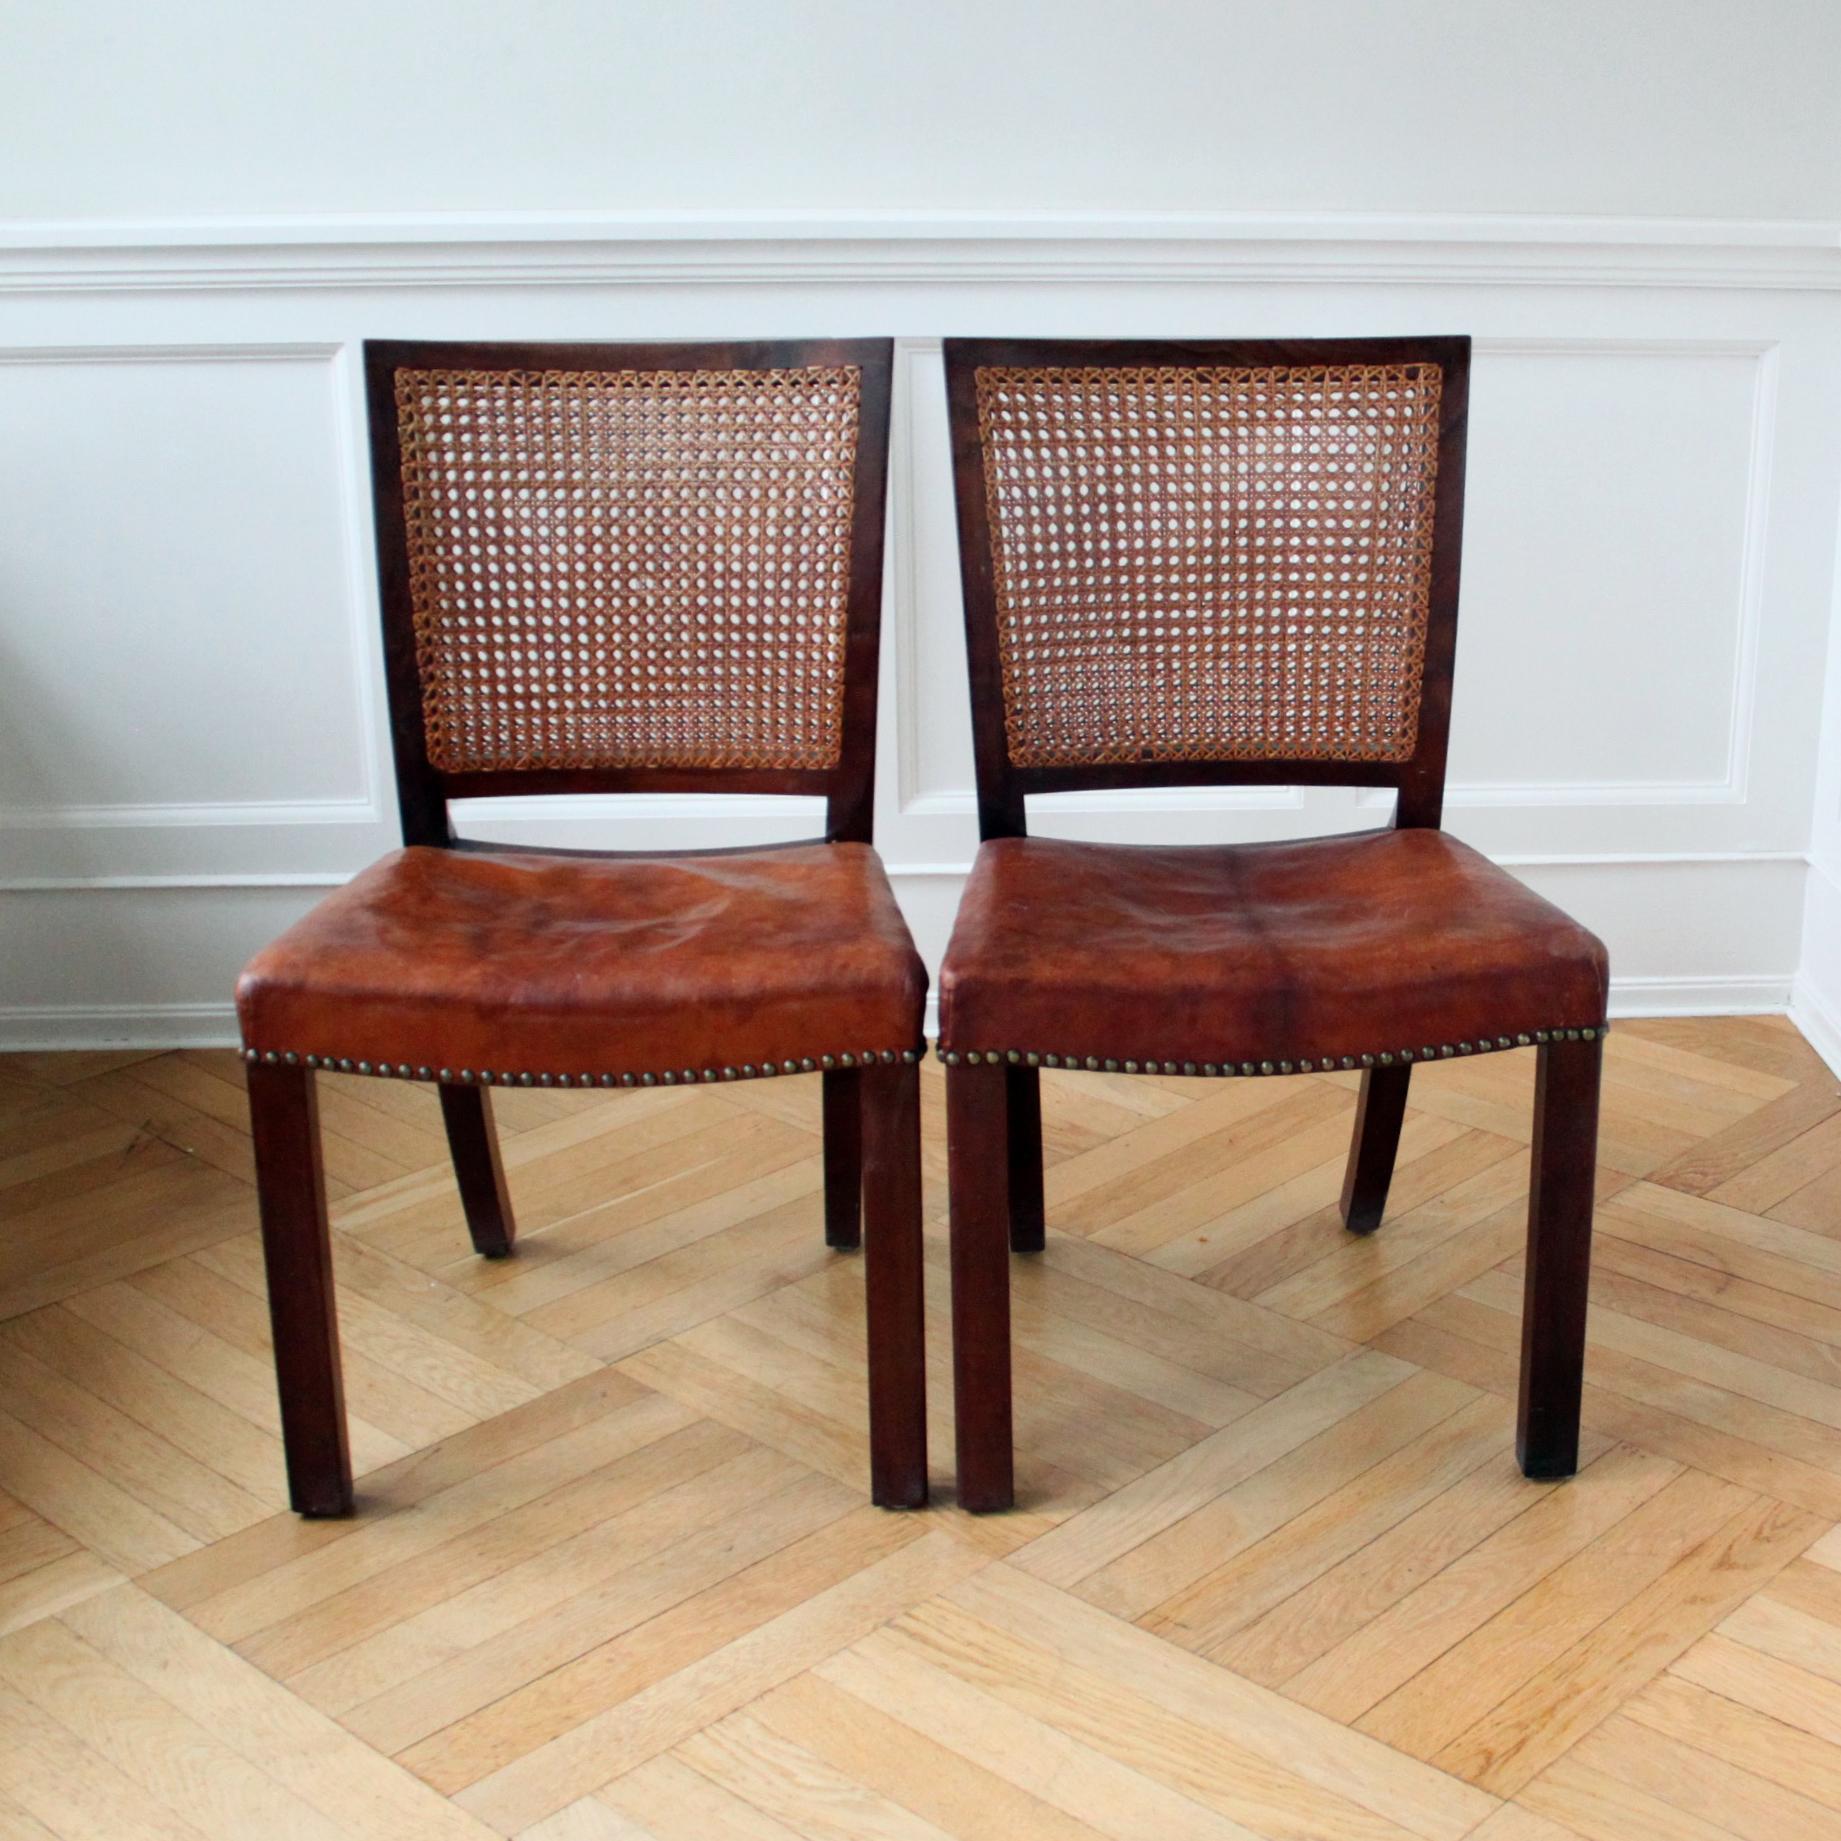 Kaare Klint & Rigmor Andersen & Rud Rasmussen   -   Early Scandinavian Modern Design

A very rare pair of chairs attributed to Kaare Klint and Rigmor Andersen, Denmark 1930s. 

The chairs are made of mahogany frame with original Niger lather seat